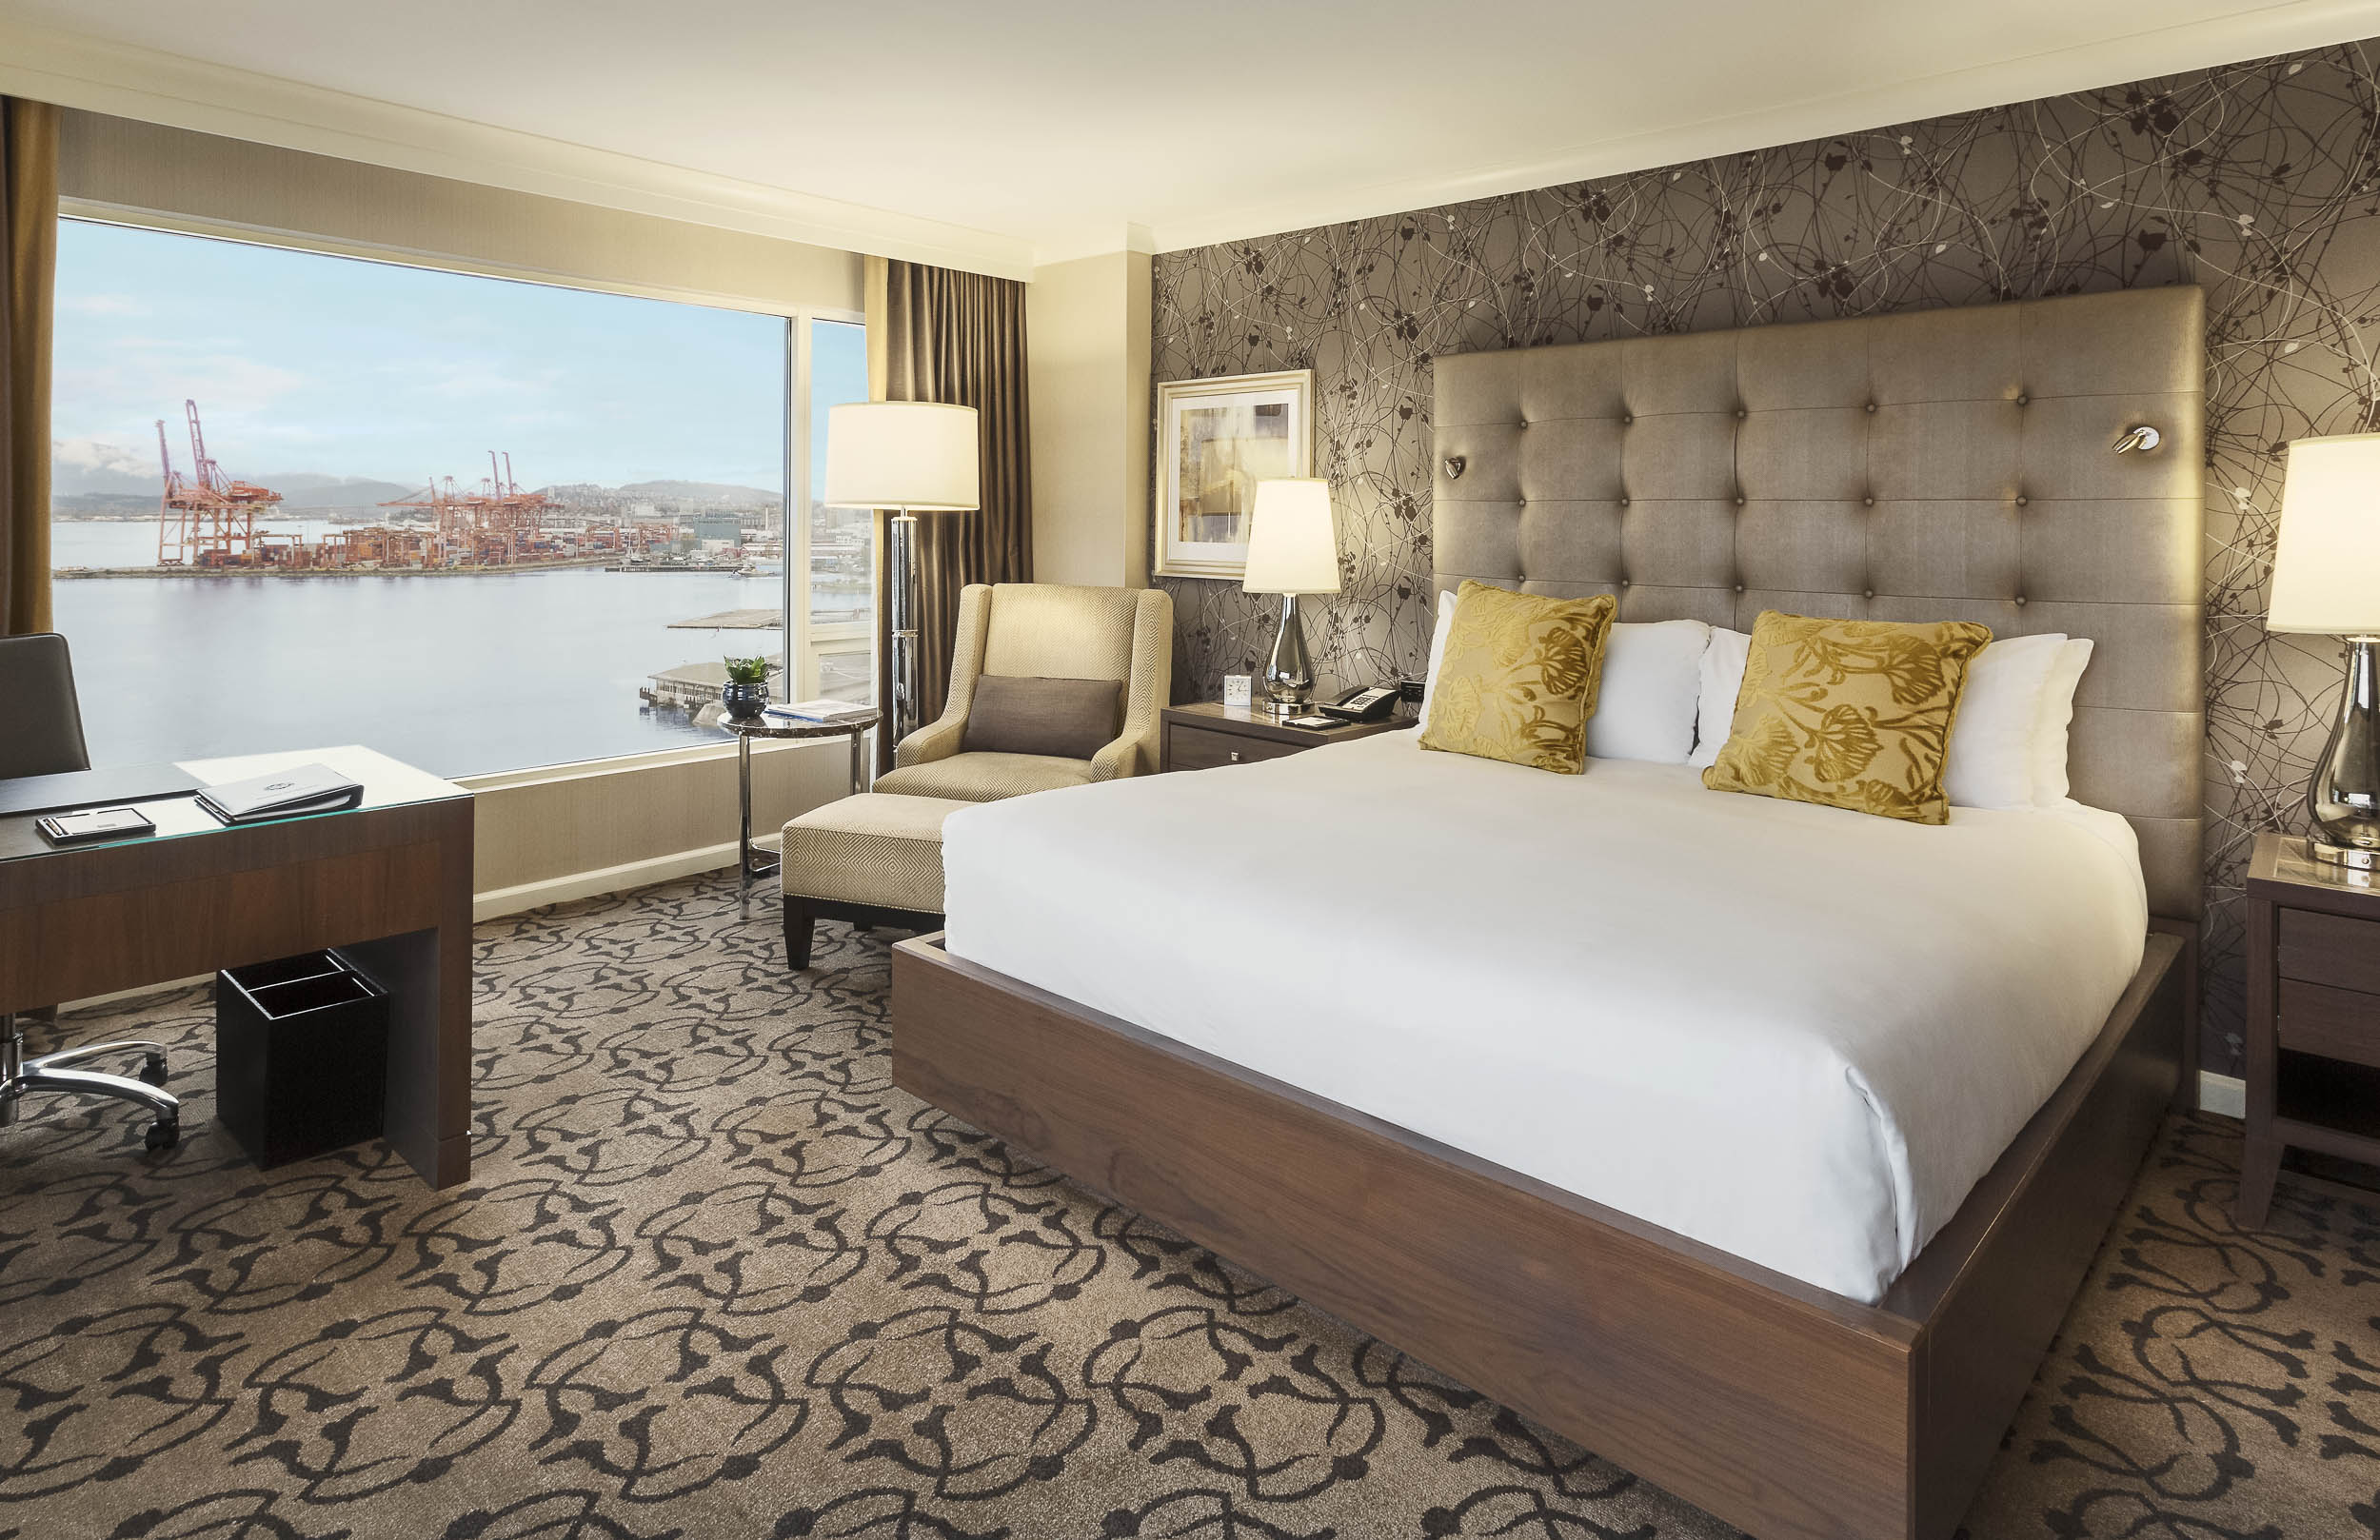 Fairmont_WaterFront_Room-after.jpg